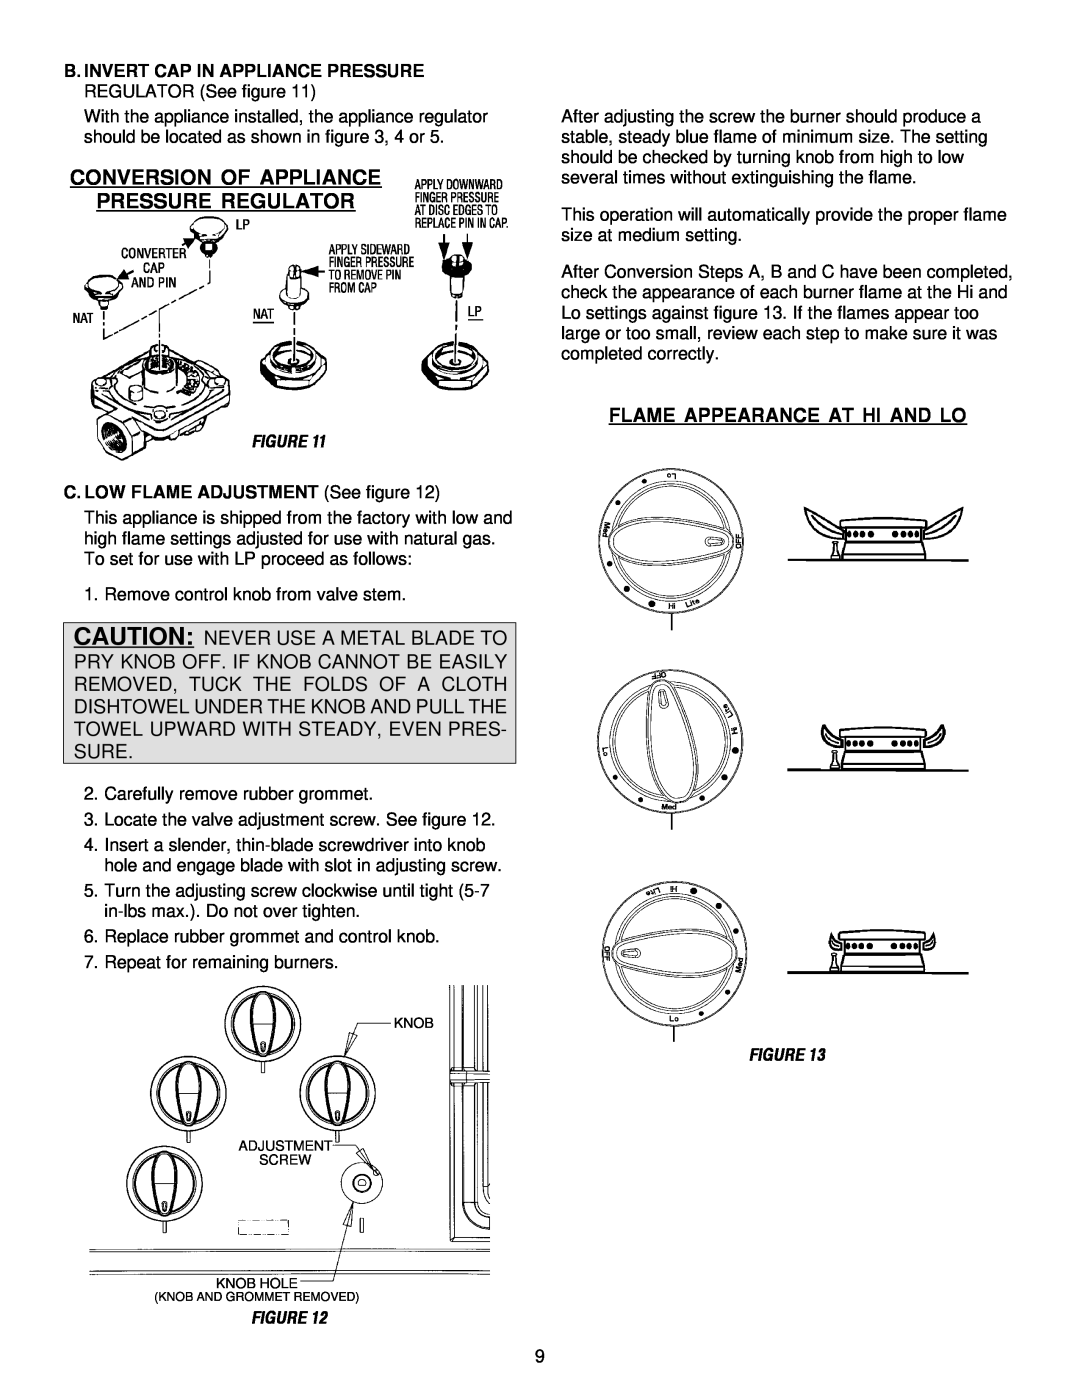 Maytag MGC5536 installation manual Conversion Of Appliance Pressure Regulator, Flame Appearance At Hi And Lo 